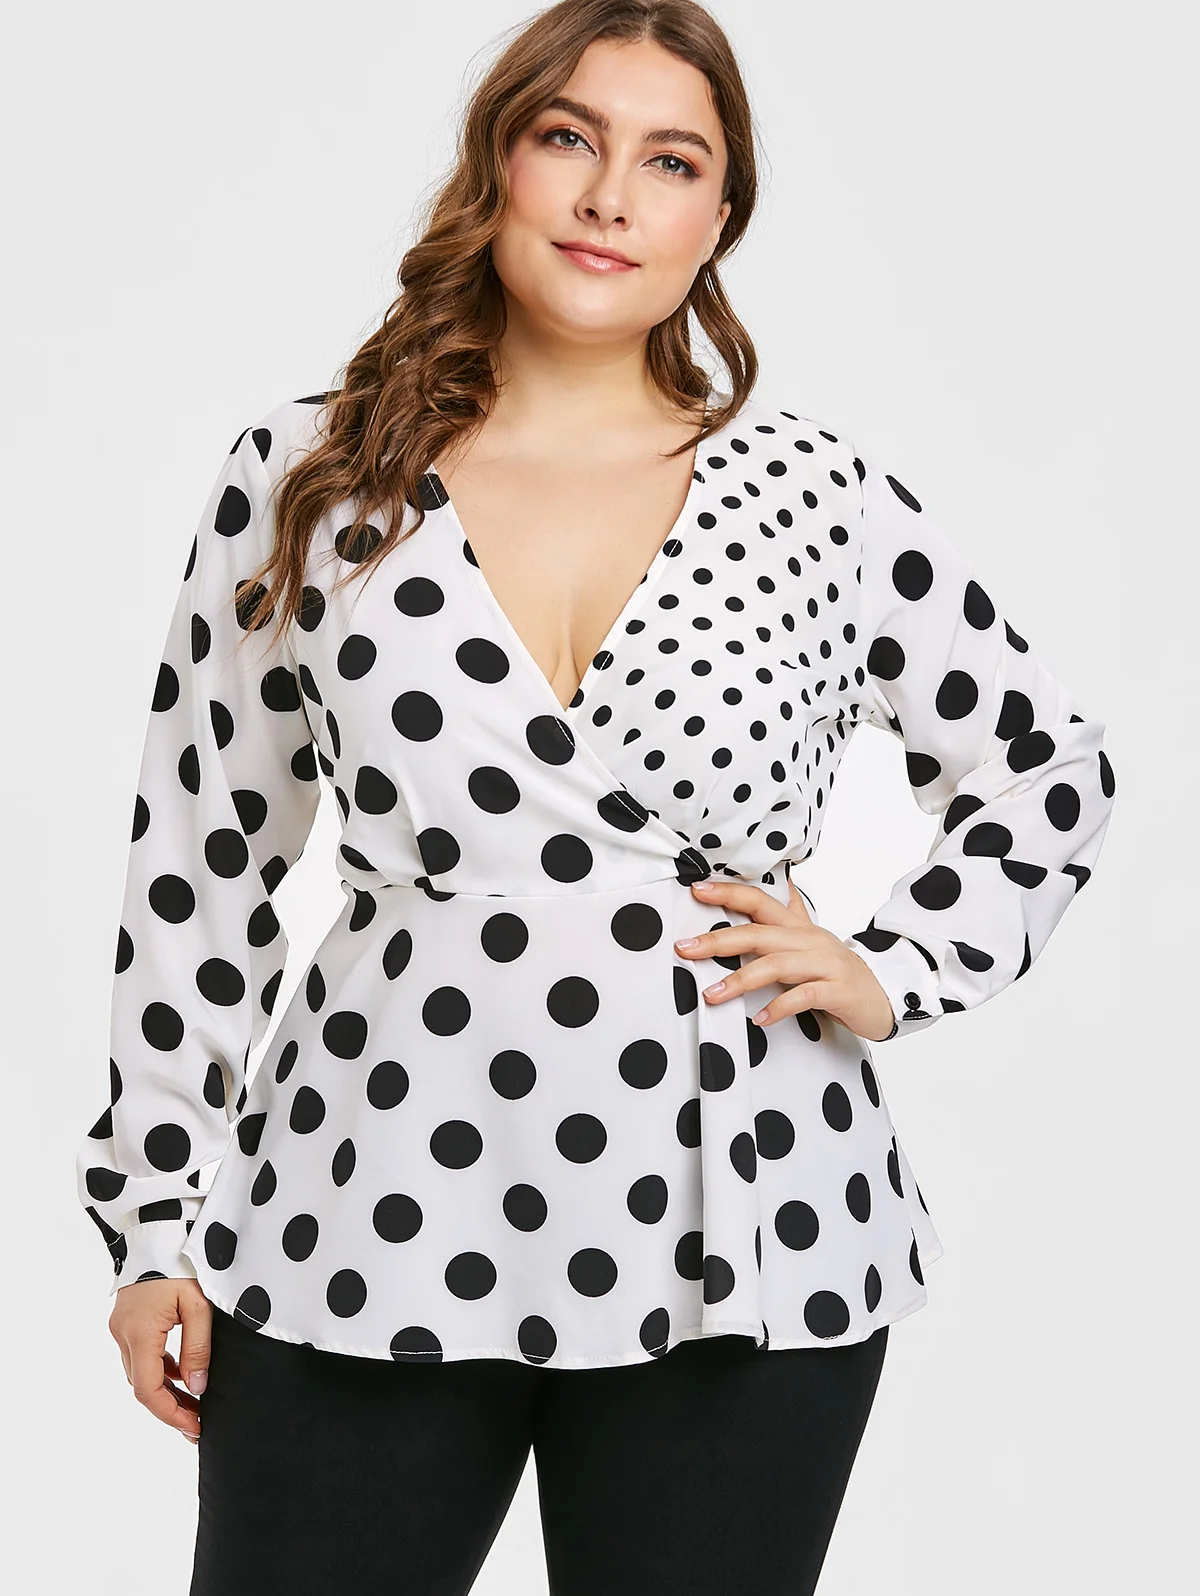 

Wipalo Women Plus Size 5XL Polka Dot Contrast Surplice Blouse V Neck Long Sleeves High Waist Casual Tee Ladies Spring Blusas Top